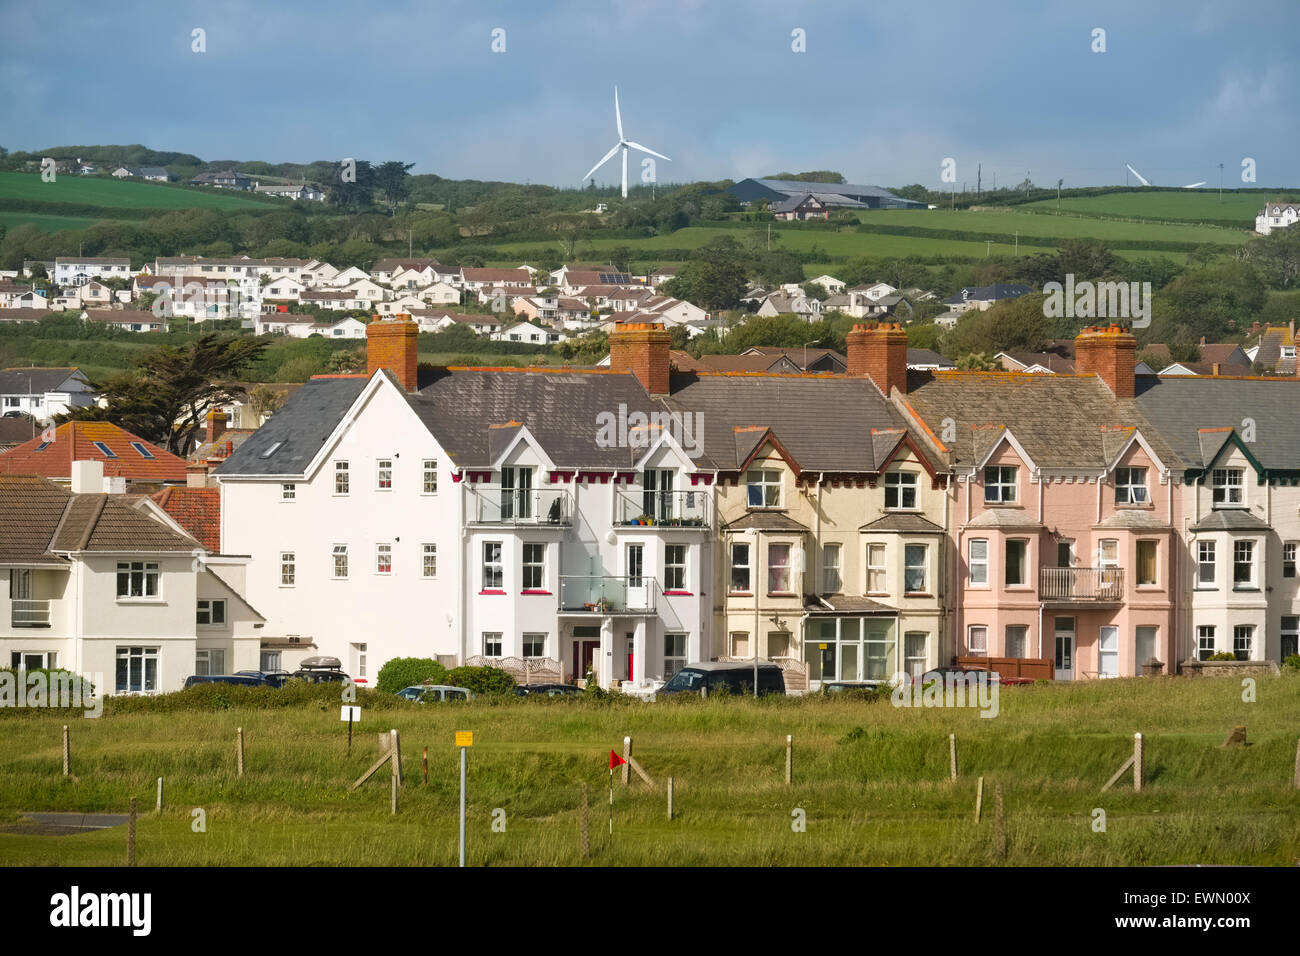 Terrace houses and wind turbines at Crooklets, Bude, Cornwall, England, UK Stock Photo